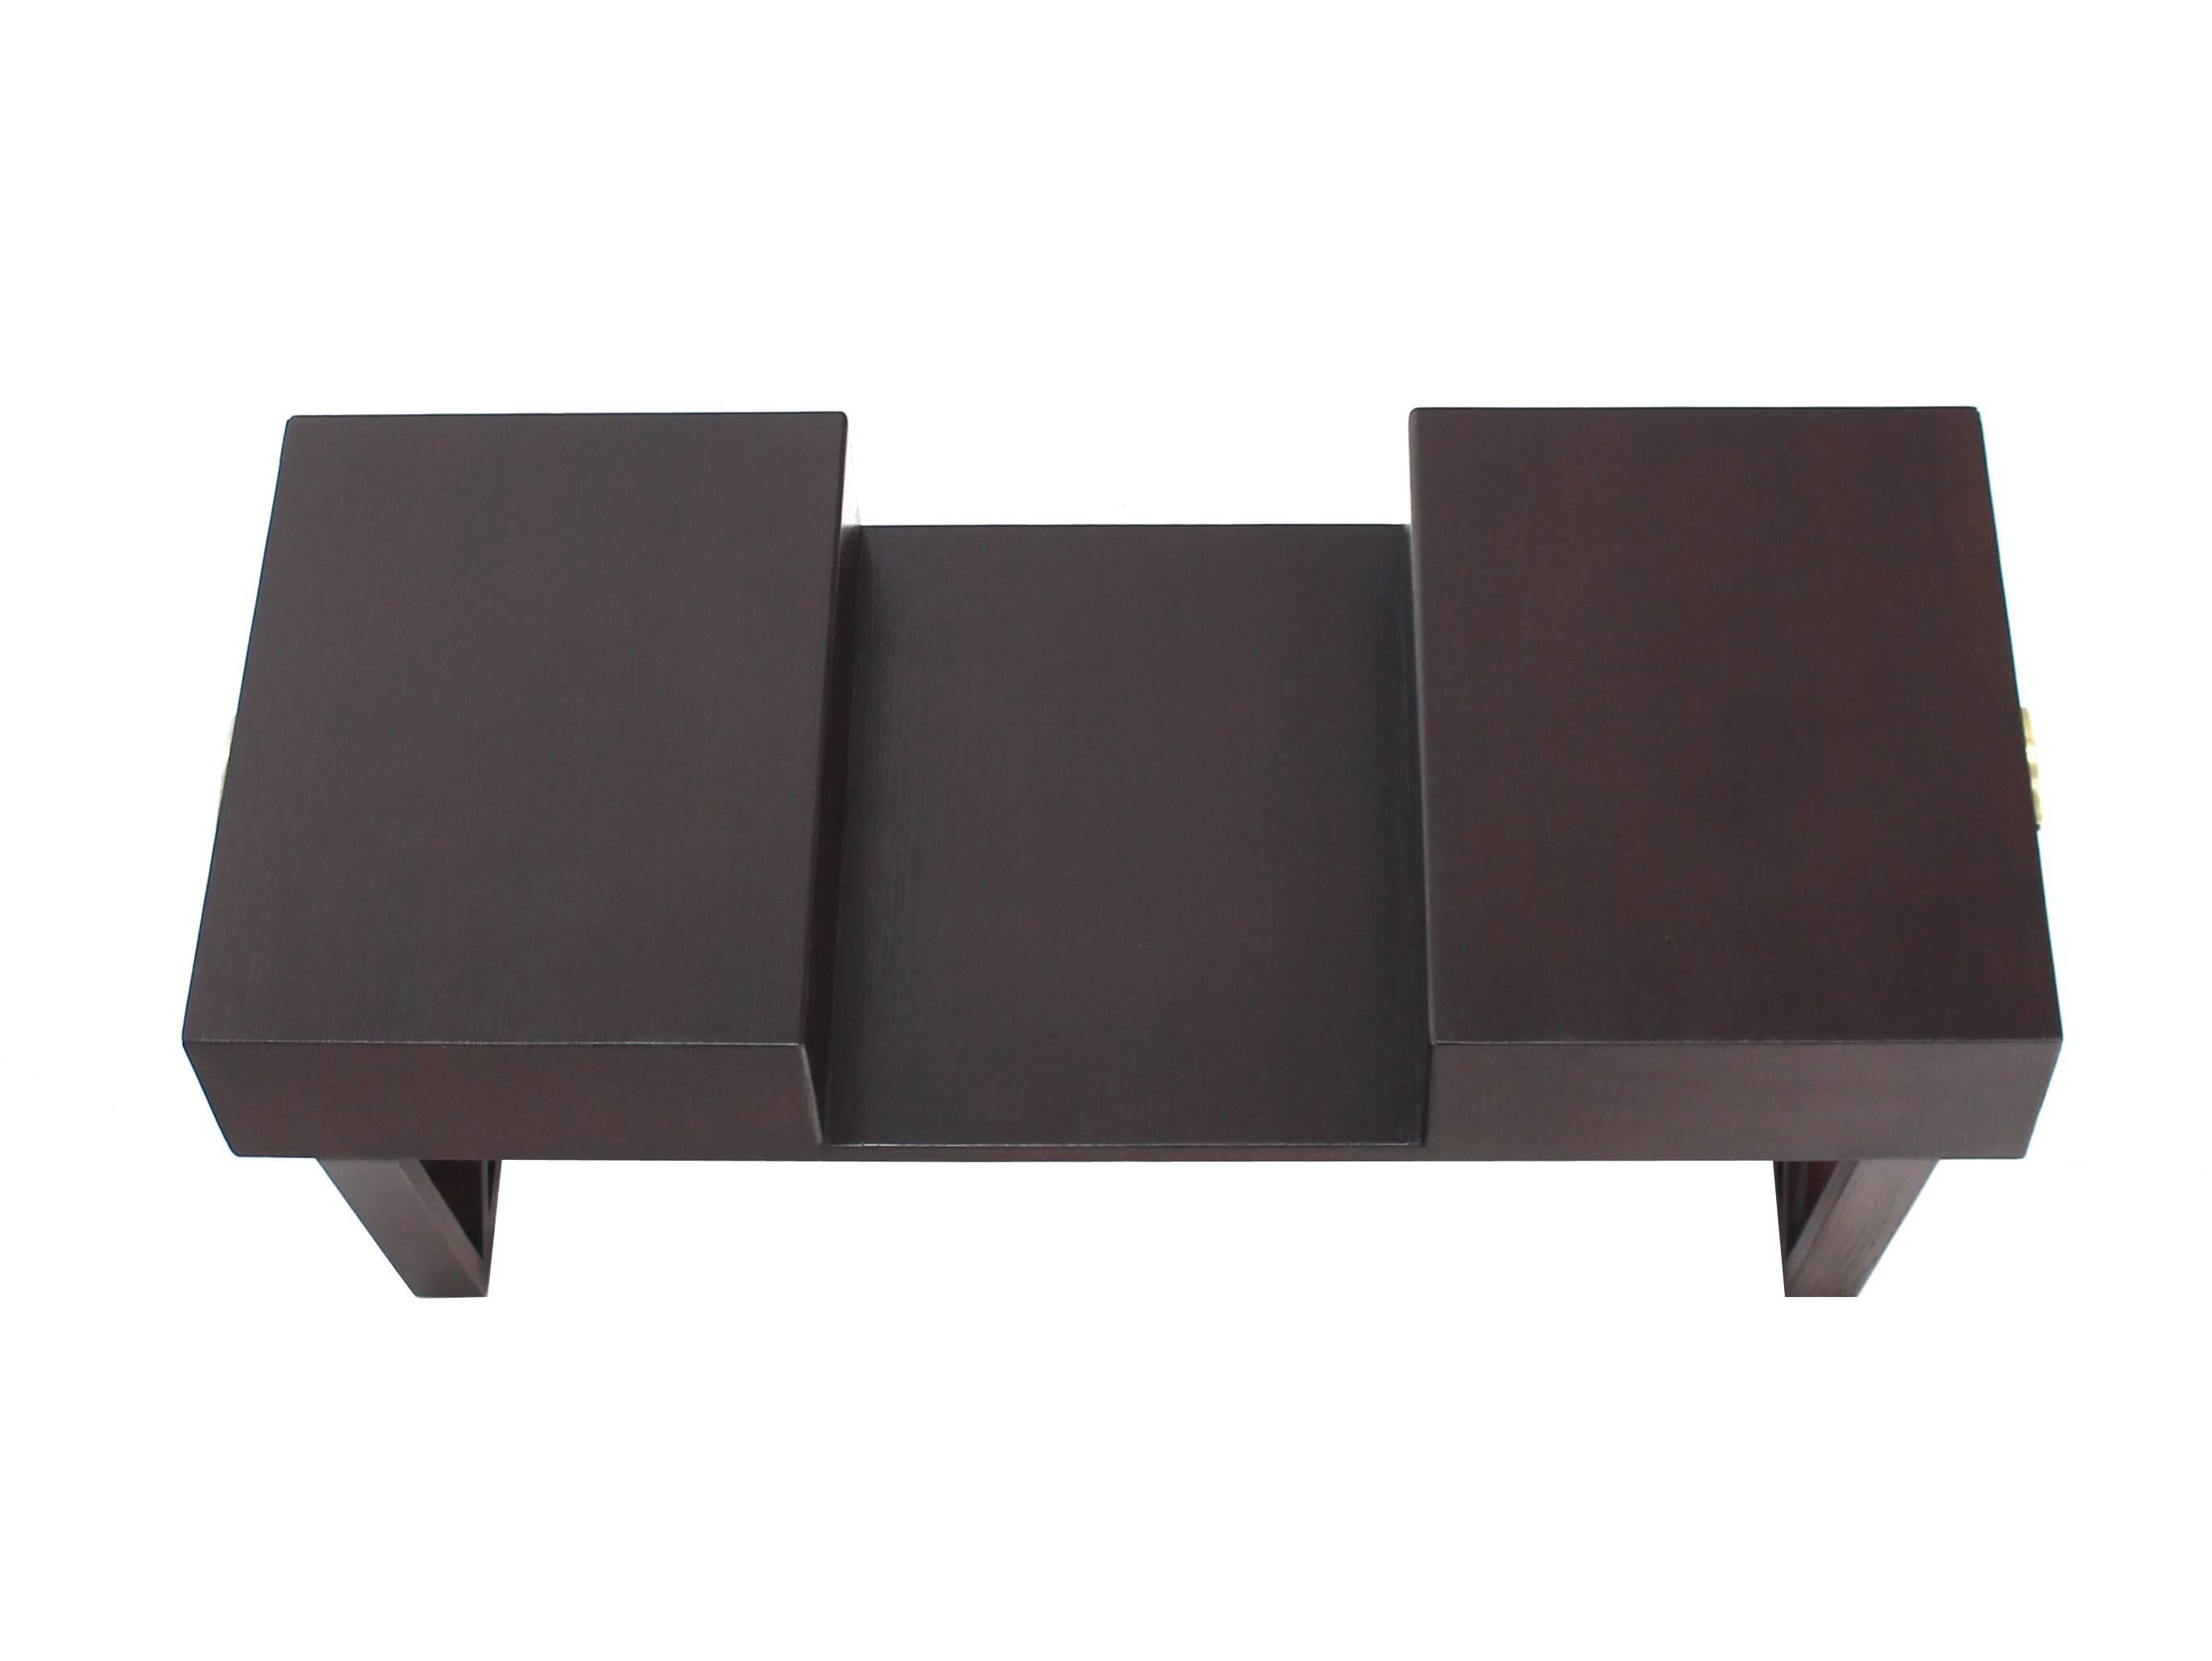 American Bi Level Coffee Table with Two Side Drawers Storage in Espresso Finish For Sale